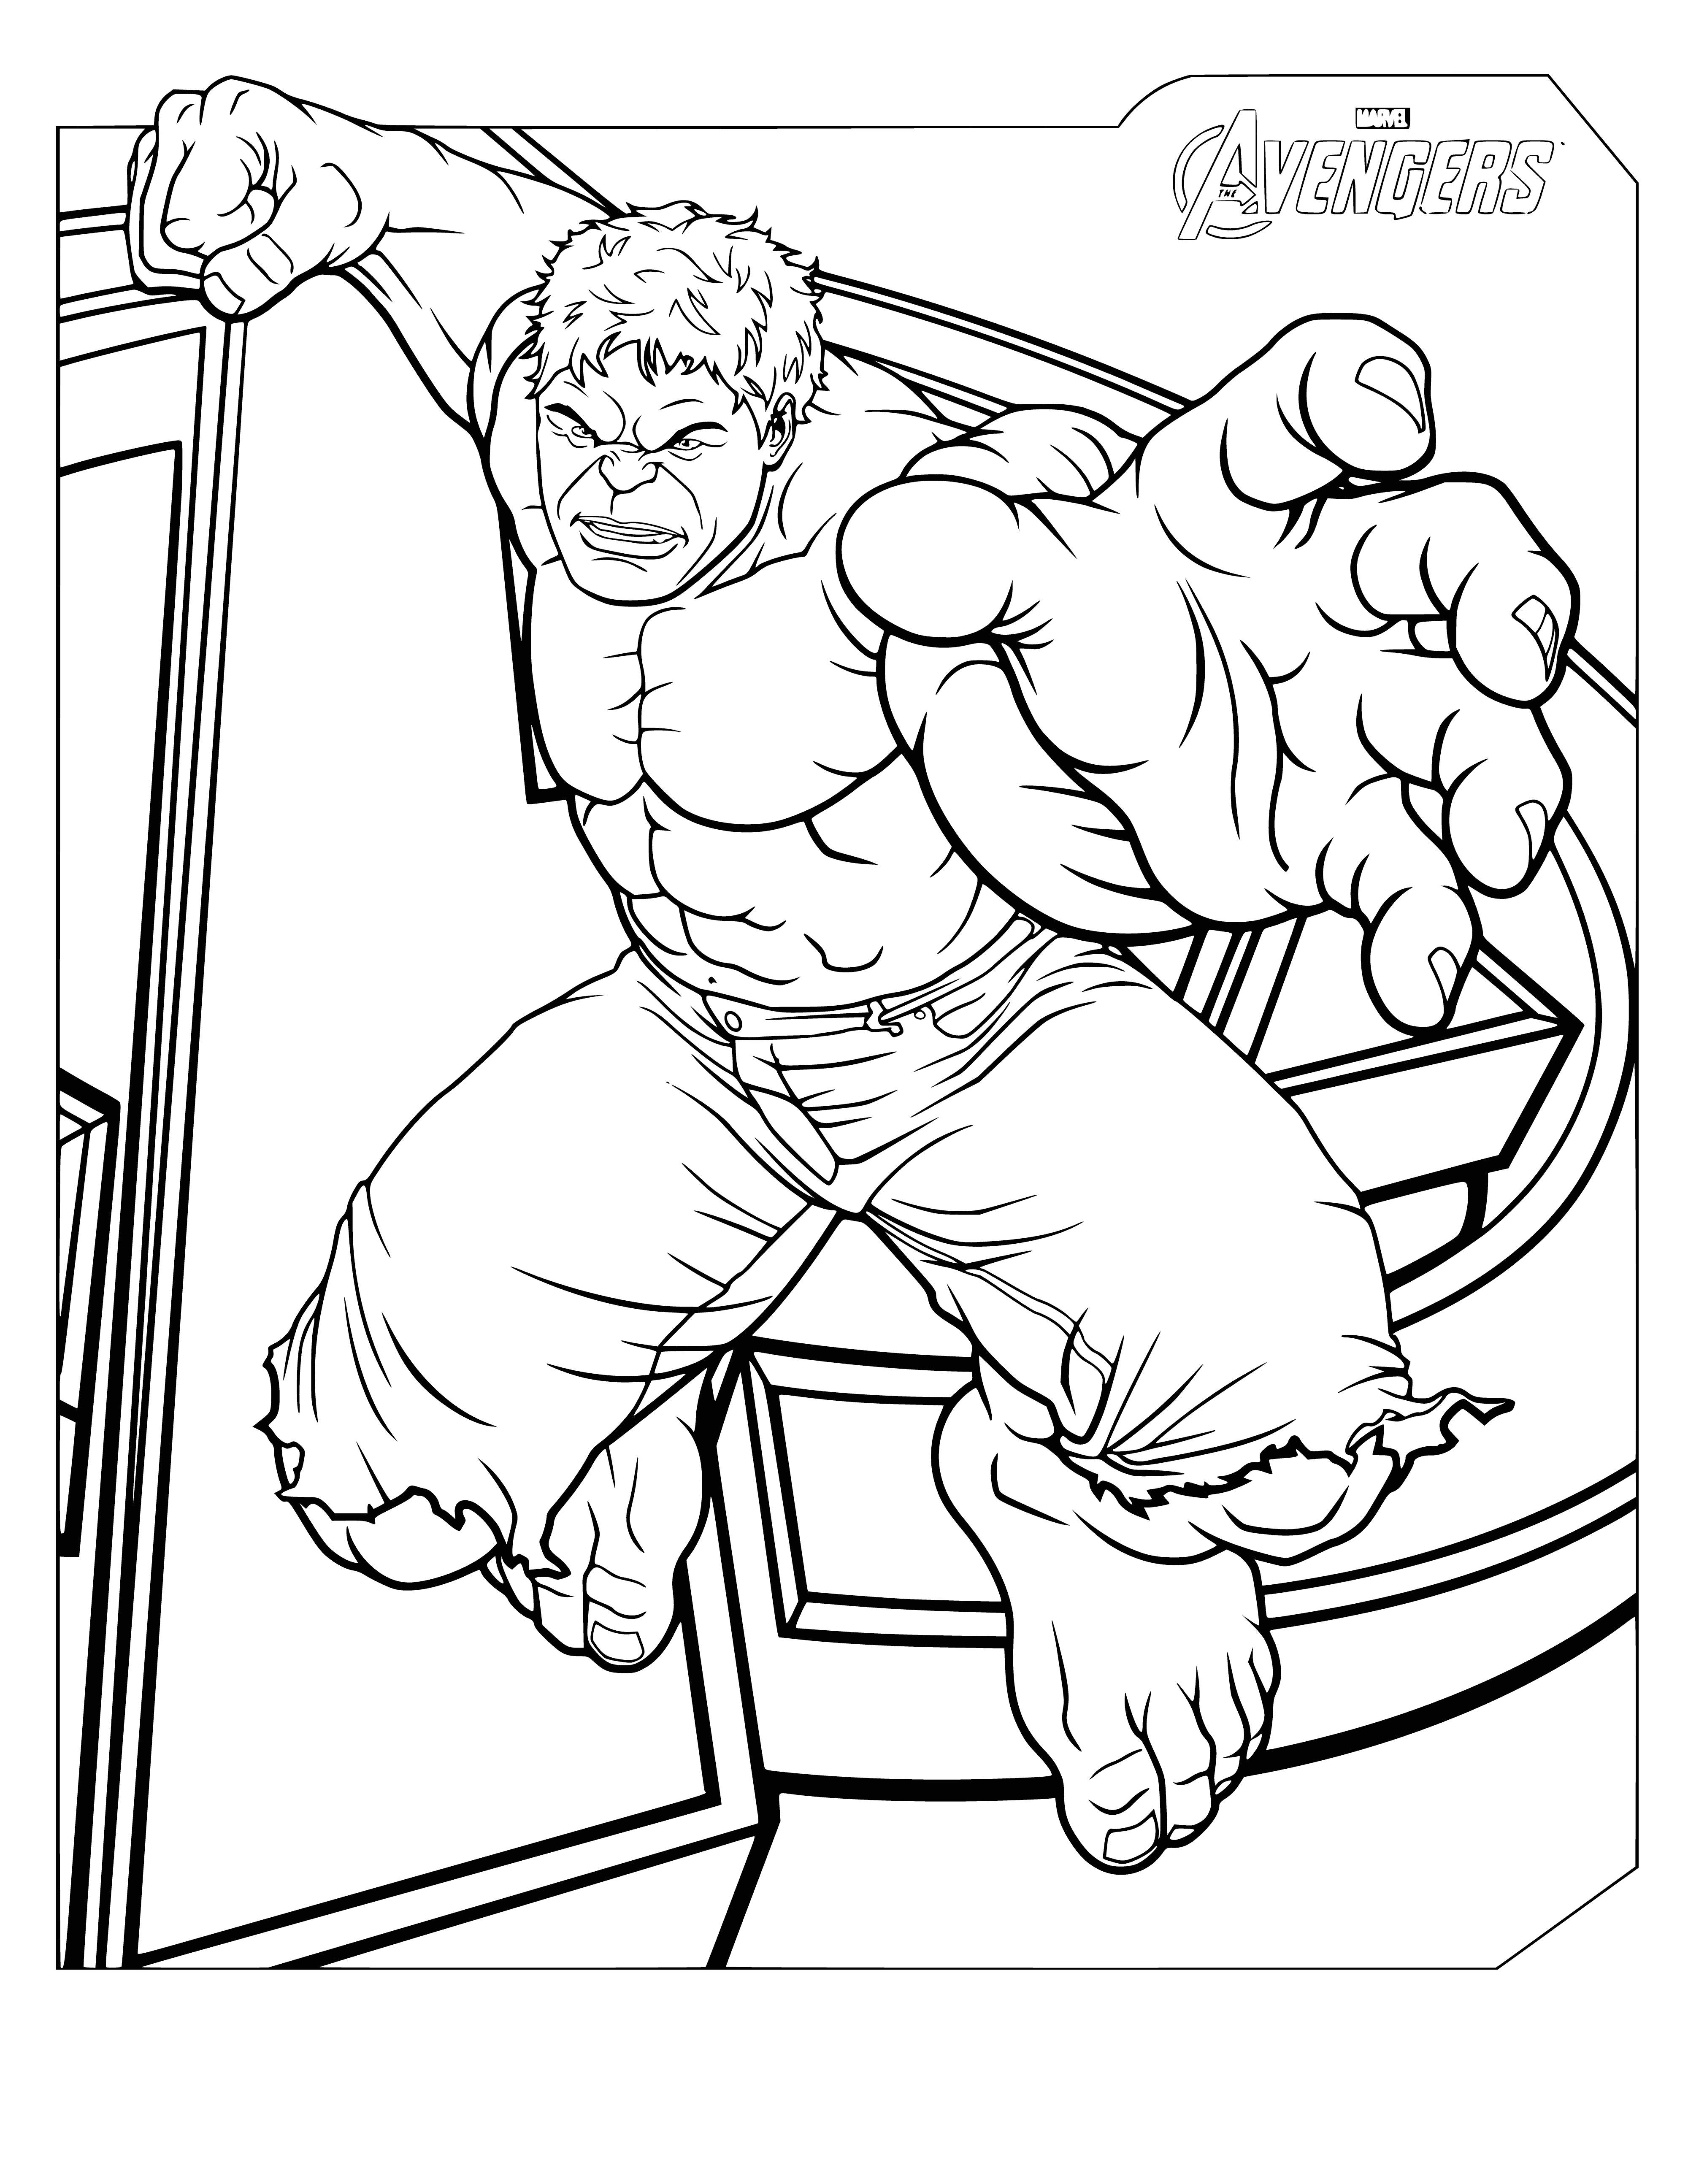 coloring page: The Hulk, a muscular green Avenger, smashes a car with his bare hands, wearing purple pants and no shirt.